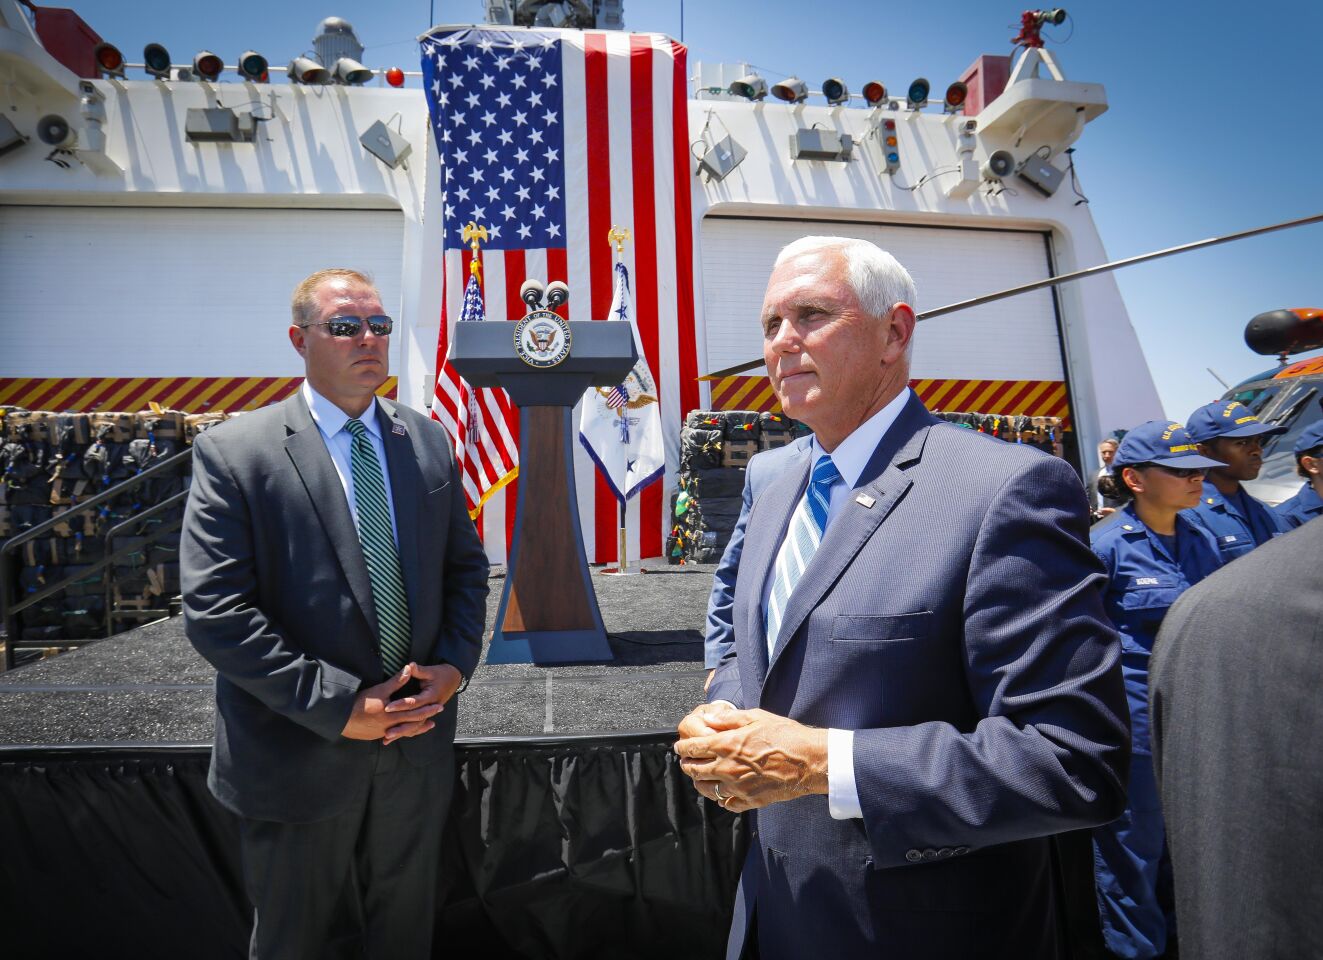 Vice President Mike Pence prepares to leave, after delivering his remarks on the U.S. Coast Guard cutter Munro, July 11, 2019, at Naval Air Station North Island in Coronado, California. The Munro, homeported in Alameda, in Northern California, is tasked with seizing drugs in international waters. About 39,000 pounds of cocaine, and 1,000 pounds of marijuana seized in the Eastern Pacific Ocean in the last few months by the Coast Guard was on display during the visit.